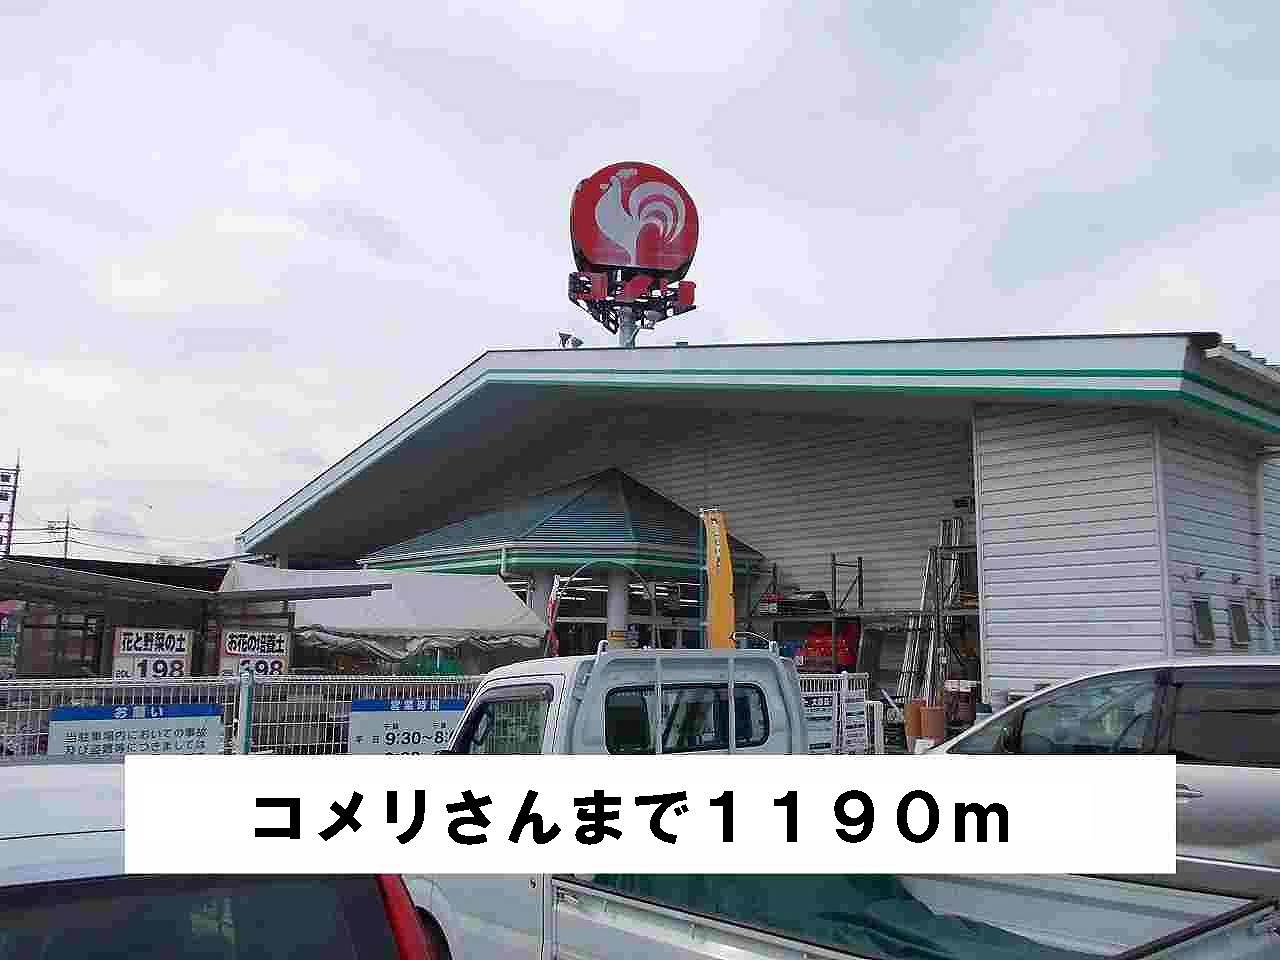 Other. Komeri Co., Ltd.'s up to (other) 1190m